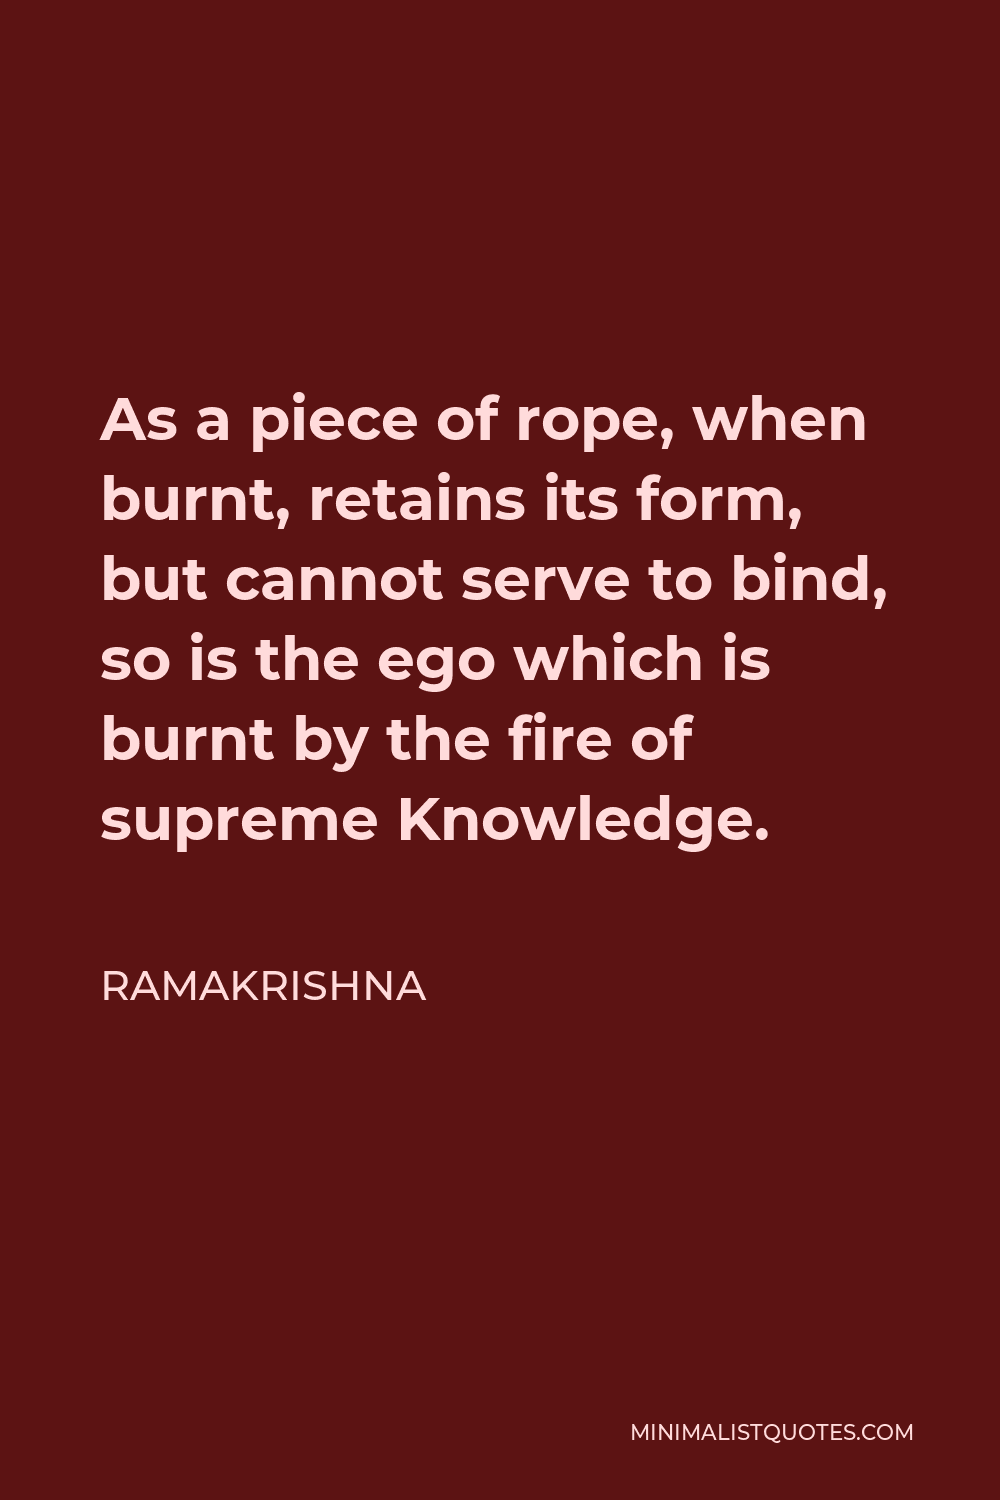 Ramakrishna Quote - As a piece of rope, when burnt, retains its form, but cannot serve to bind, so is the ego which is burnt by the fire of supreme Knowledge.